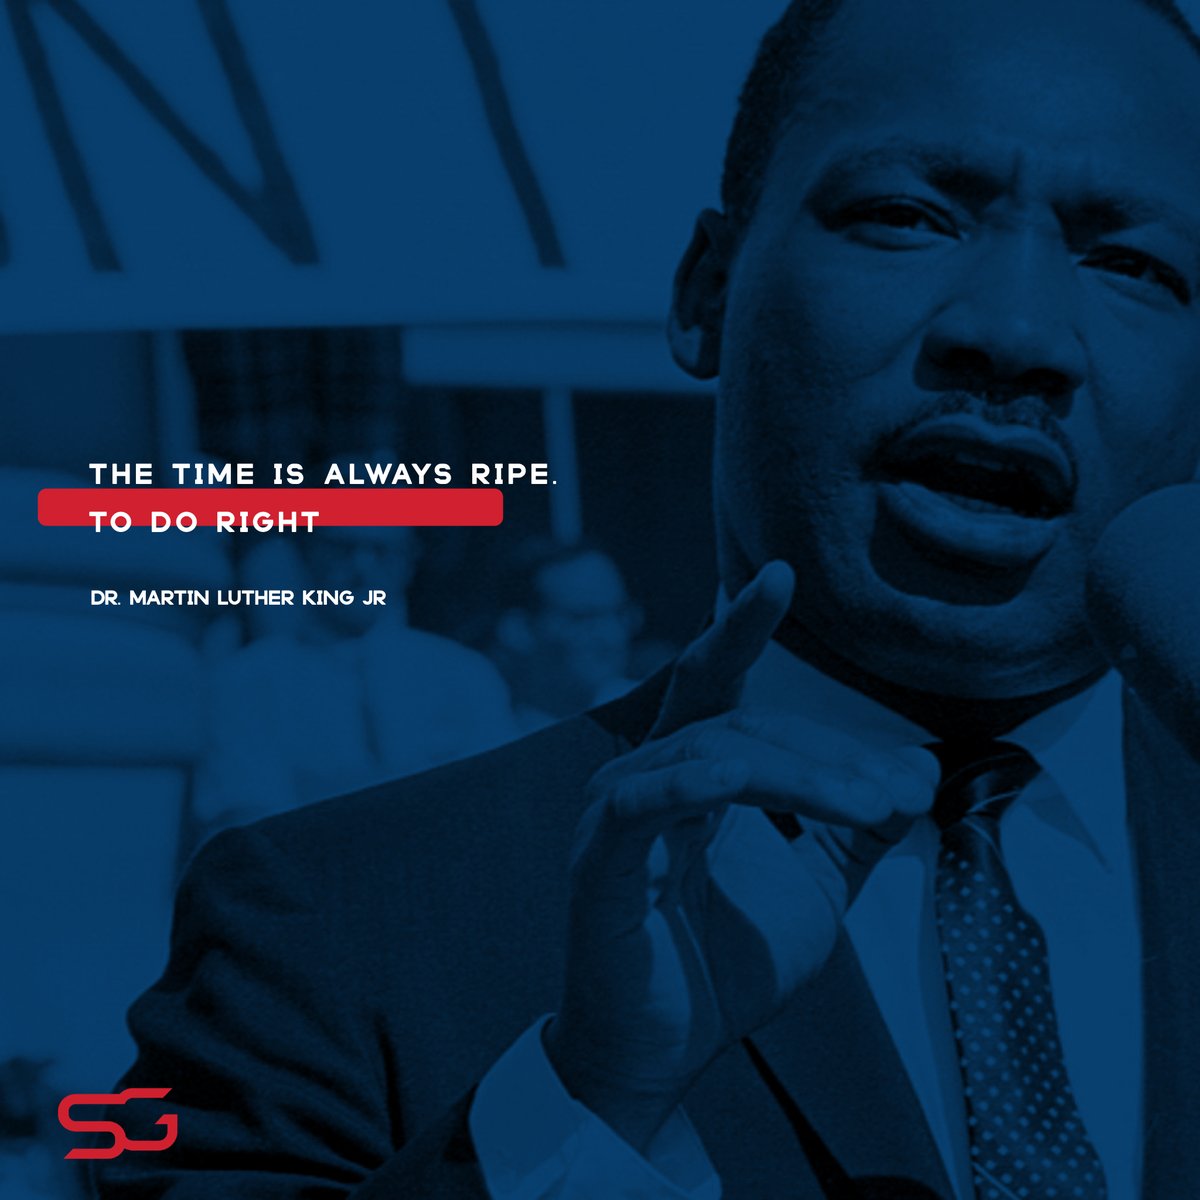 Happy MLK Day!

We must use time creatively, in the knowledge that the time is always ripe to do right. 
#MLKDAY